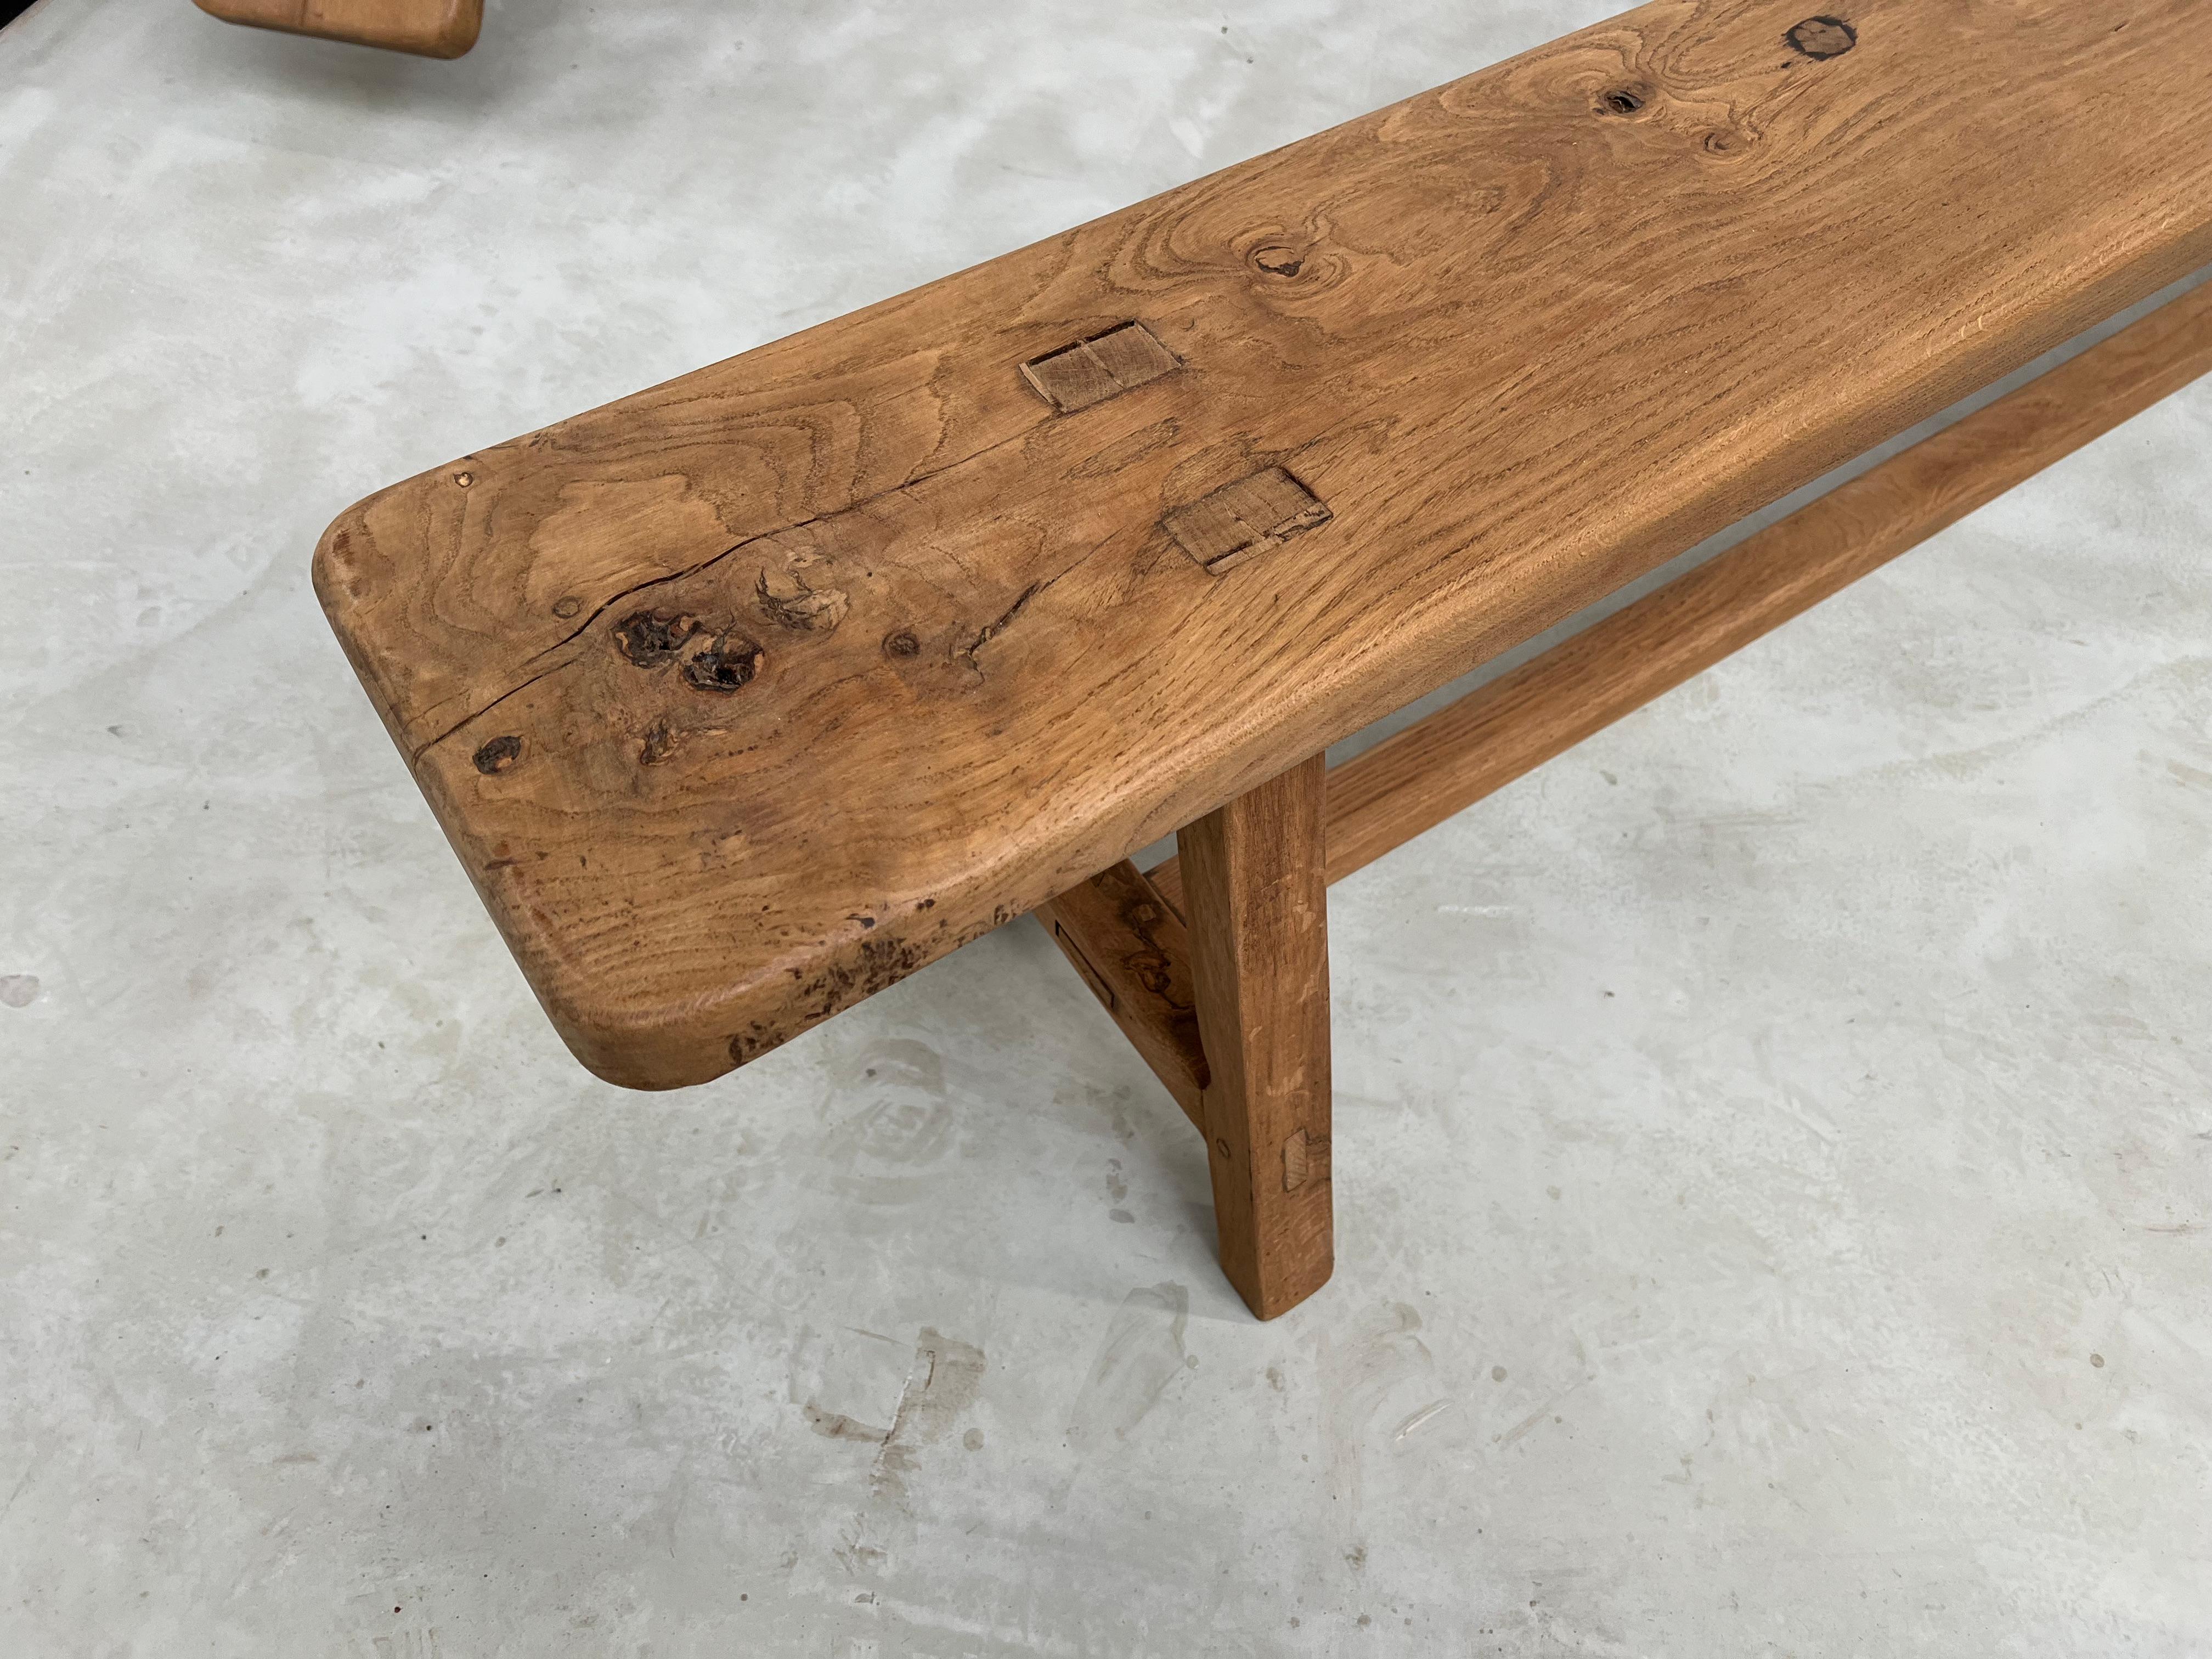 Dating from the 1950s, the work on these two solid oak farm benches is very careful. The restoration carried out by us enhances the veining and patina of the oak wood. Note that one of the two benches does not have a reinforcement bar but that it is